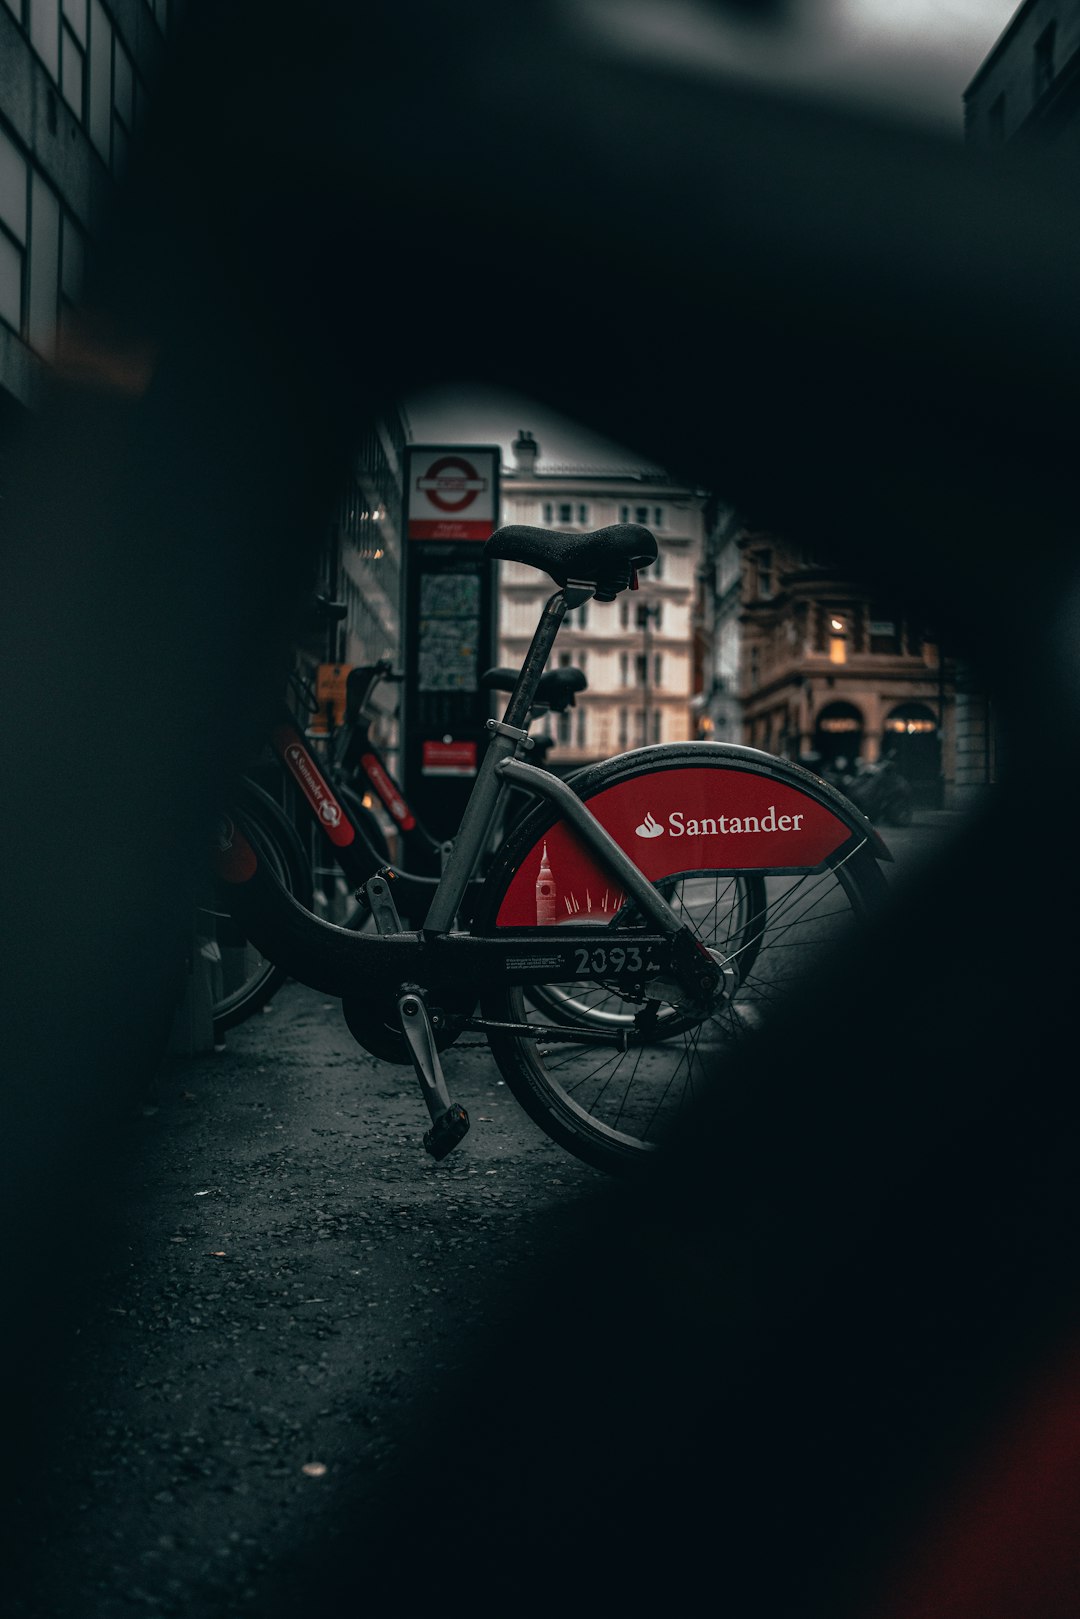 red and black bicycle parked beside building during night time